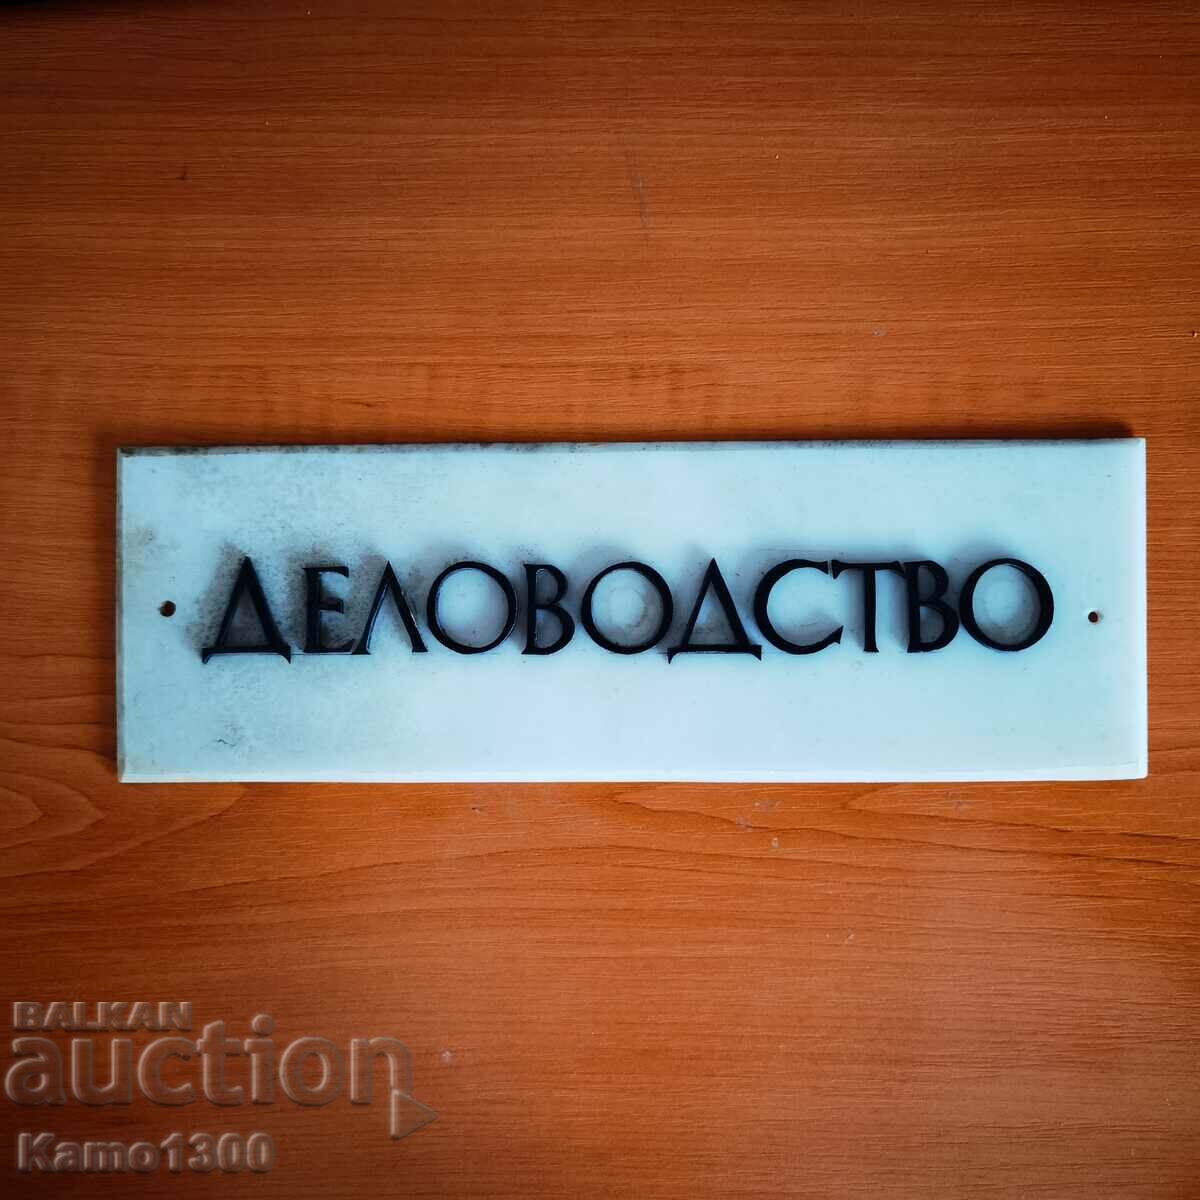 Social sign "Delovodstvo" with embossed letters